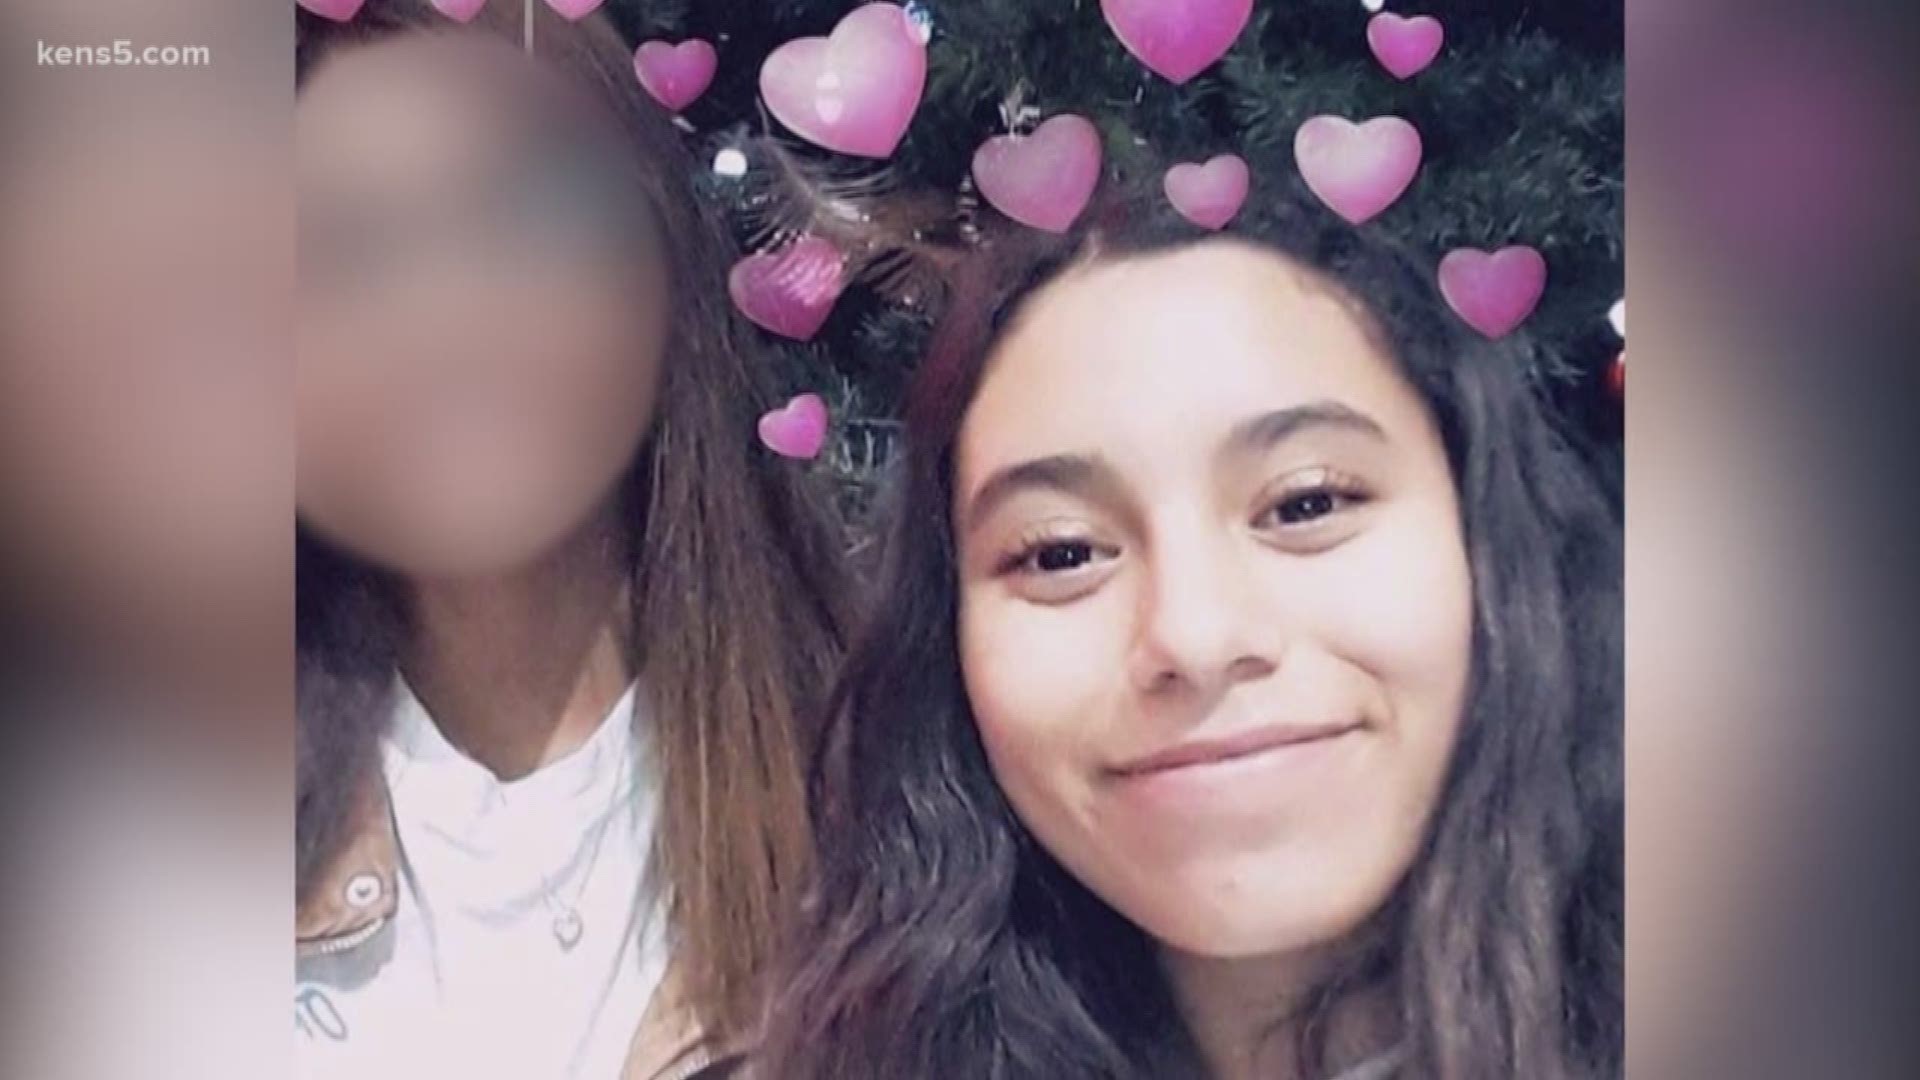 A statewide Amber Alert is in effect this morning for a missing teenager from Hondo. 14-year-old Eva Garcia has been missing since mid-October.